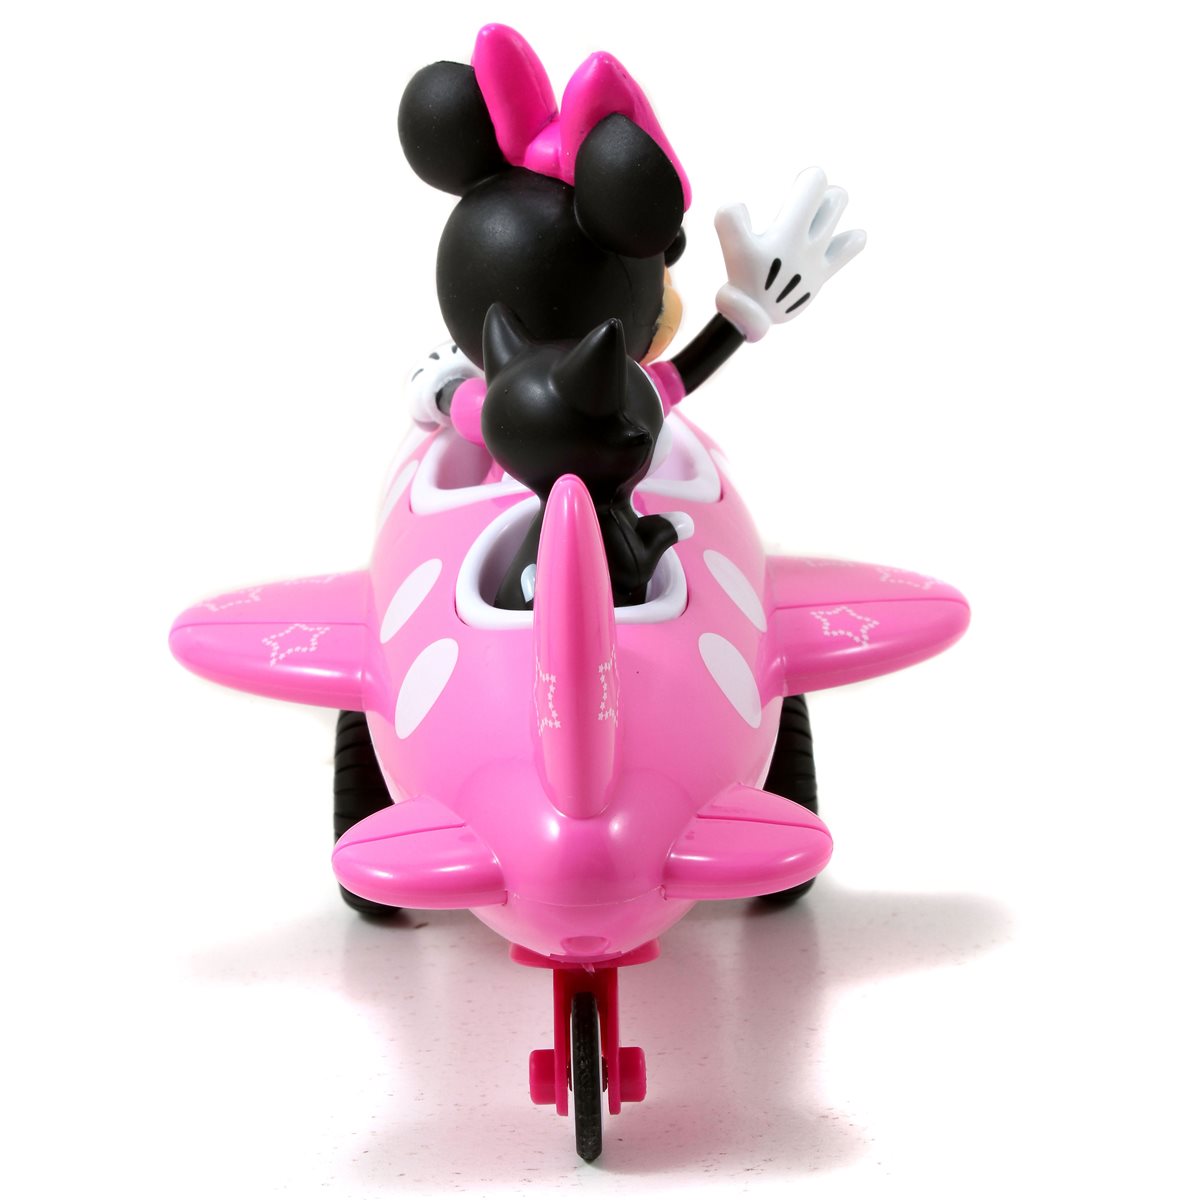 minnie mouse remote control airplane